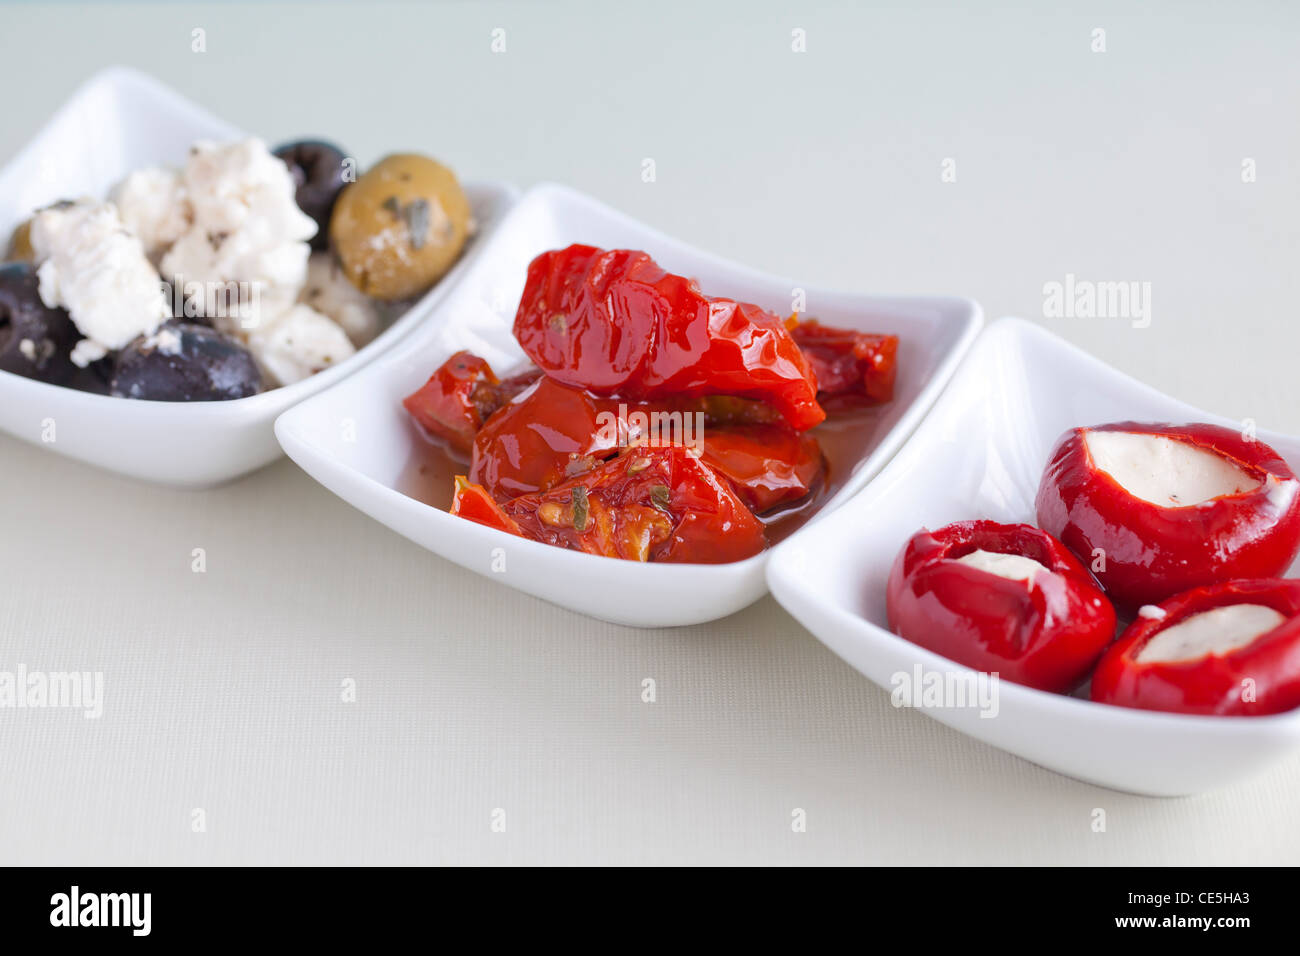 Mezze with olives, feta cheese, stuffed peppers & sun dried tomatoes Stock Photo